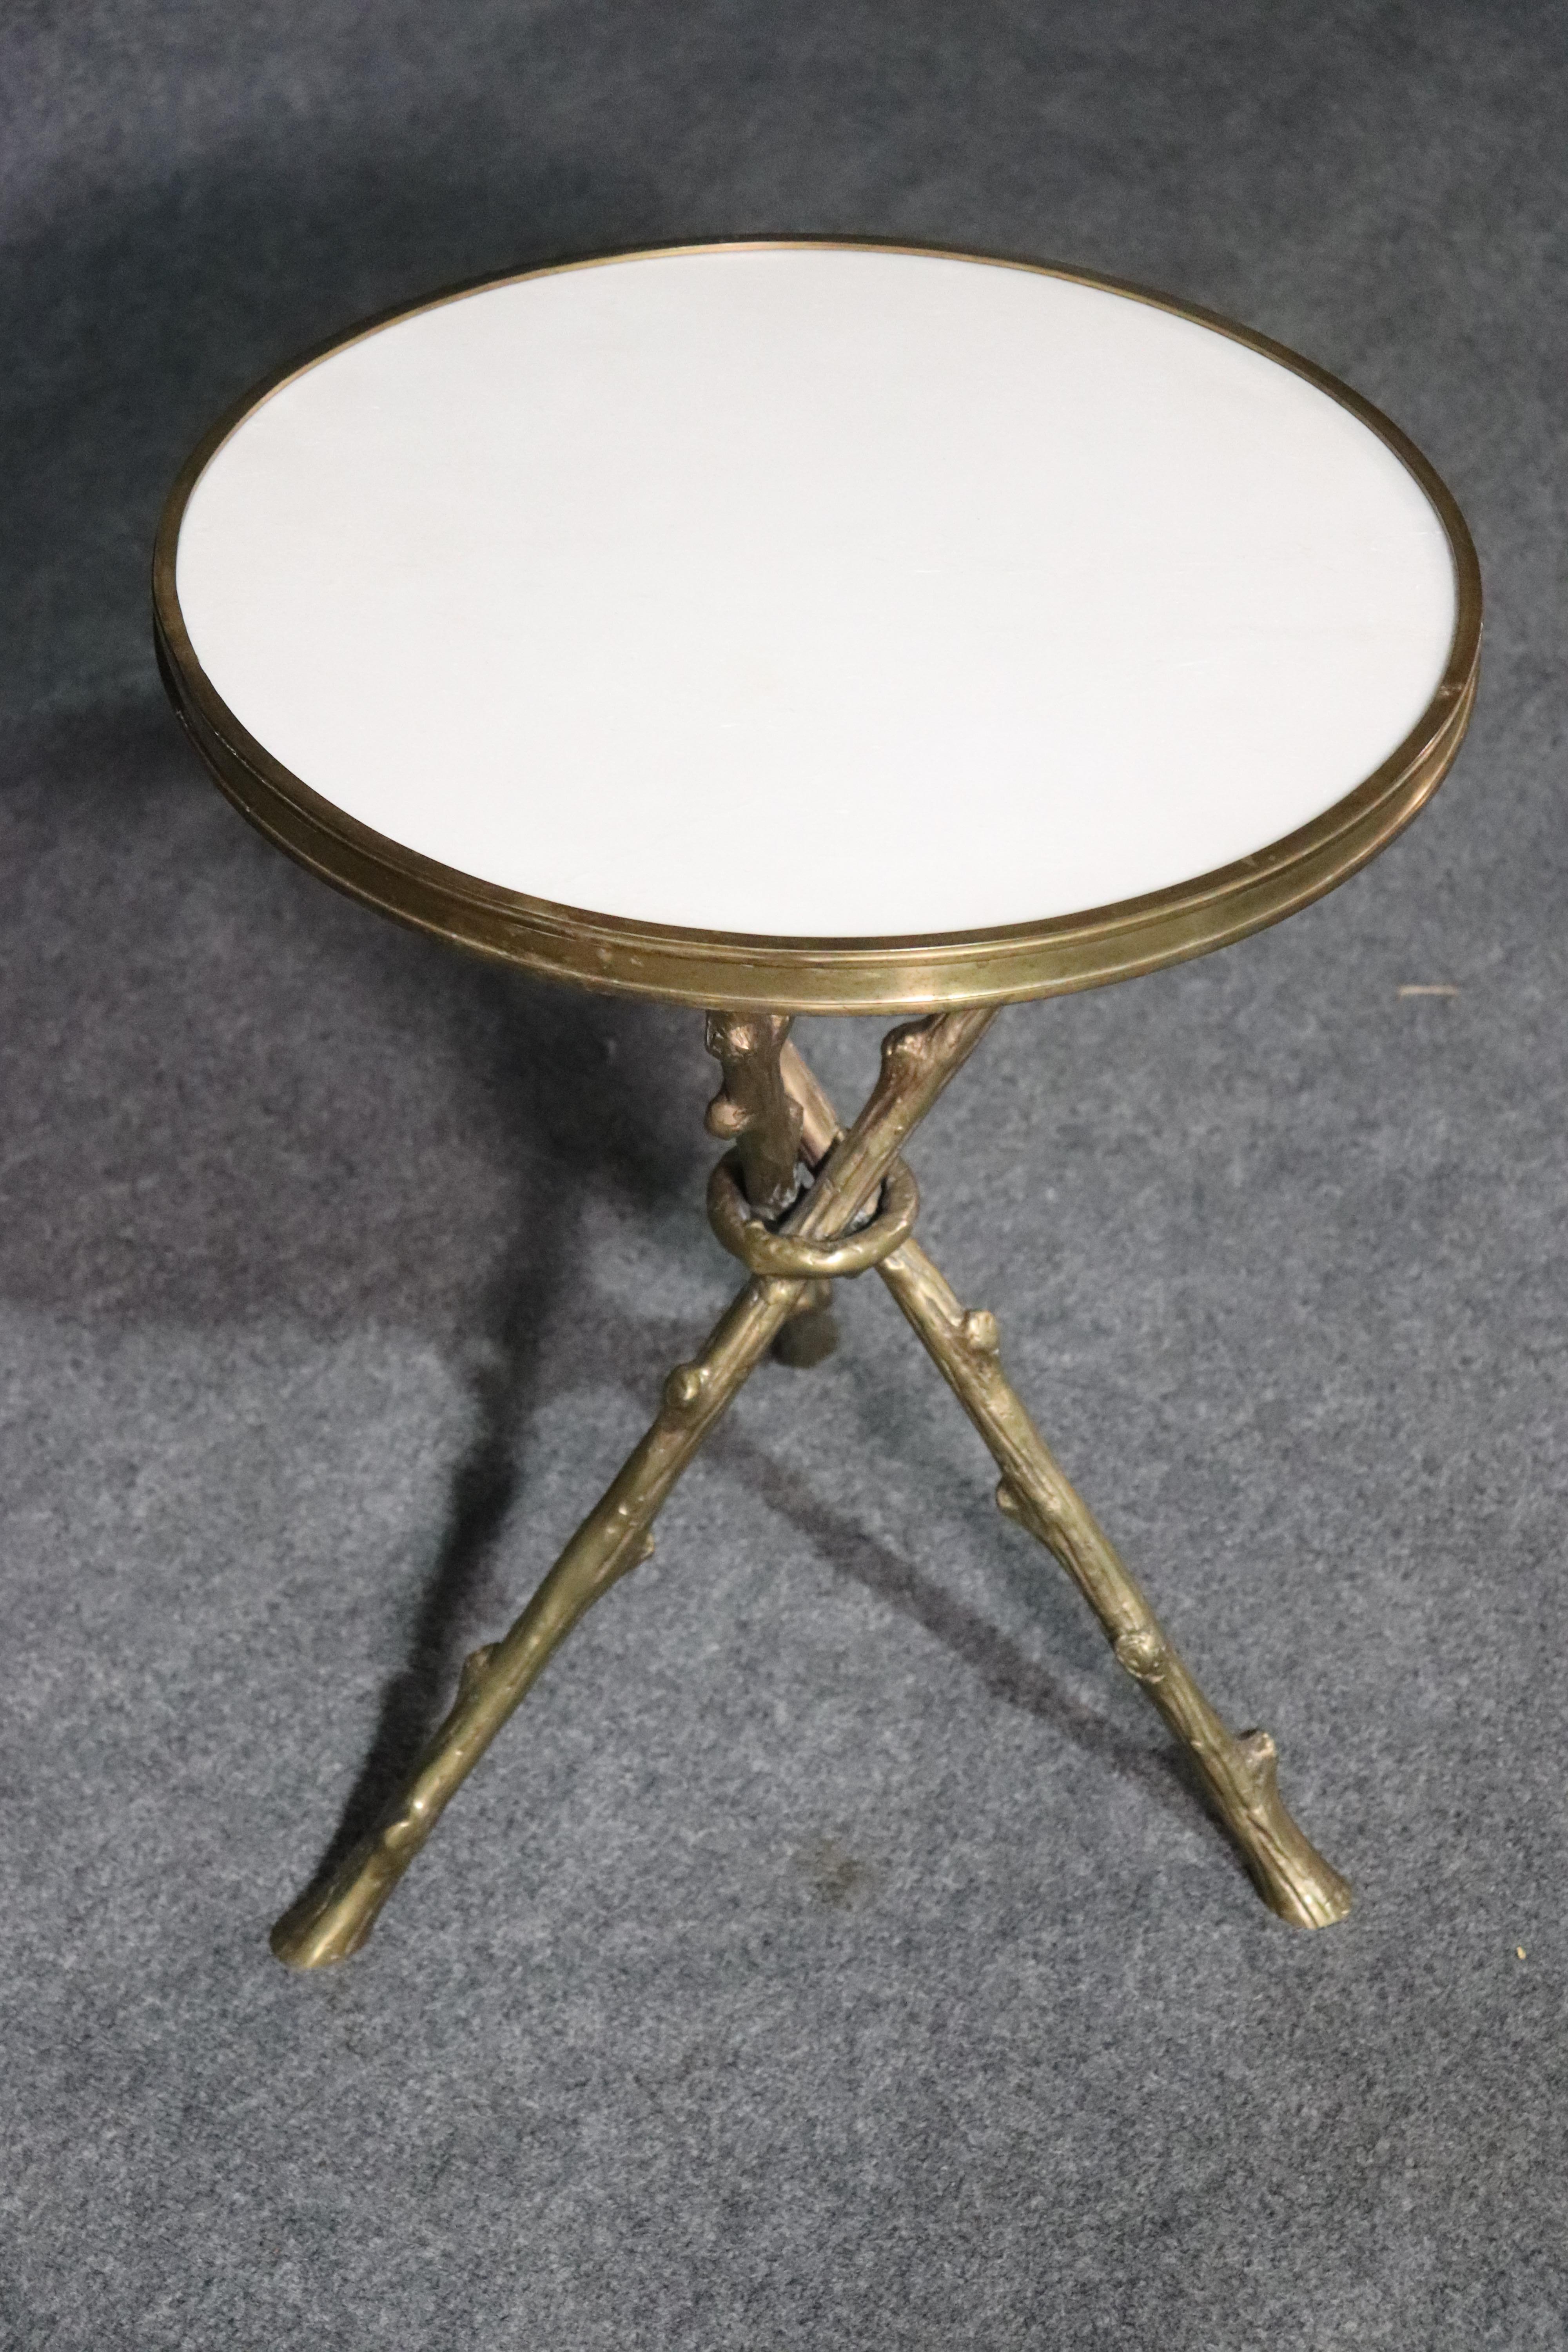 This is a single, and very beautiful table. This very heavy table, is perfect for use as a side table where only one is needed. This will work fine for use as a table between two chairs as well. The table is solid bronze and white marble on top.